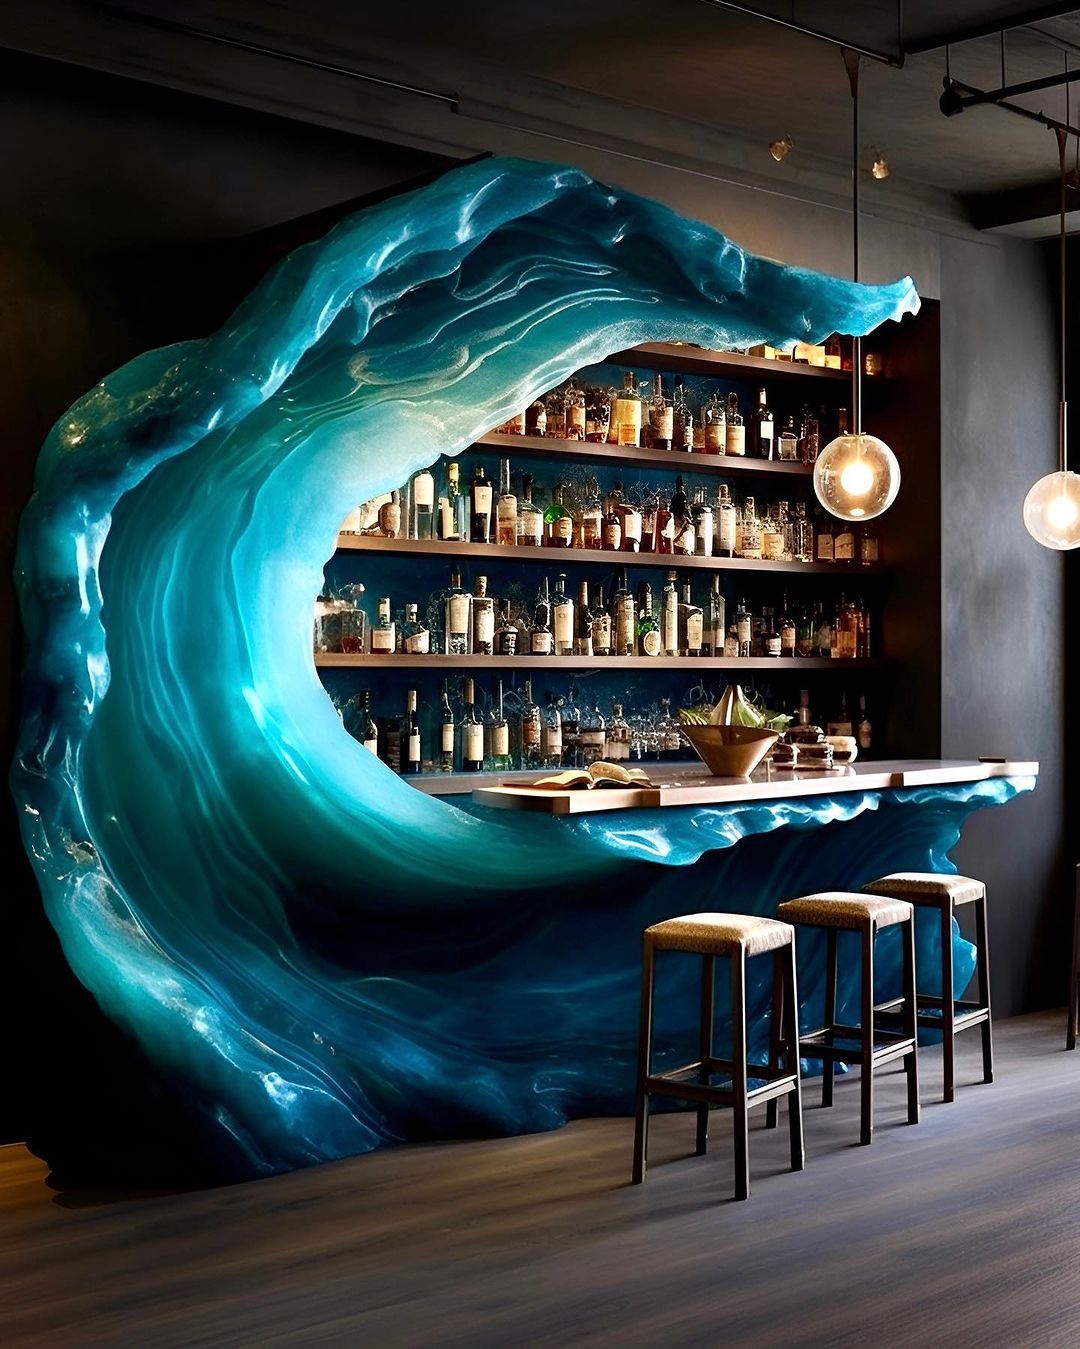 The Bar Counter is Influenced by the Dynamic and Contemporary Vibes of the Ocean